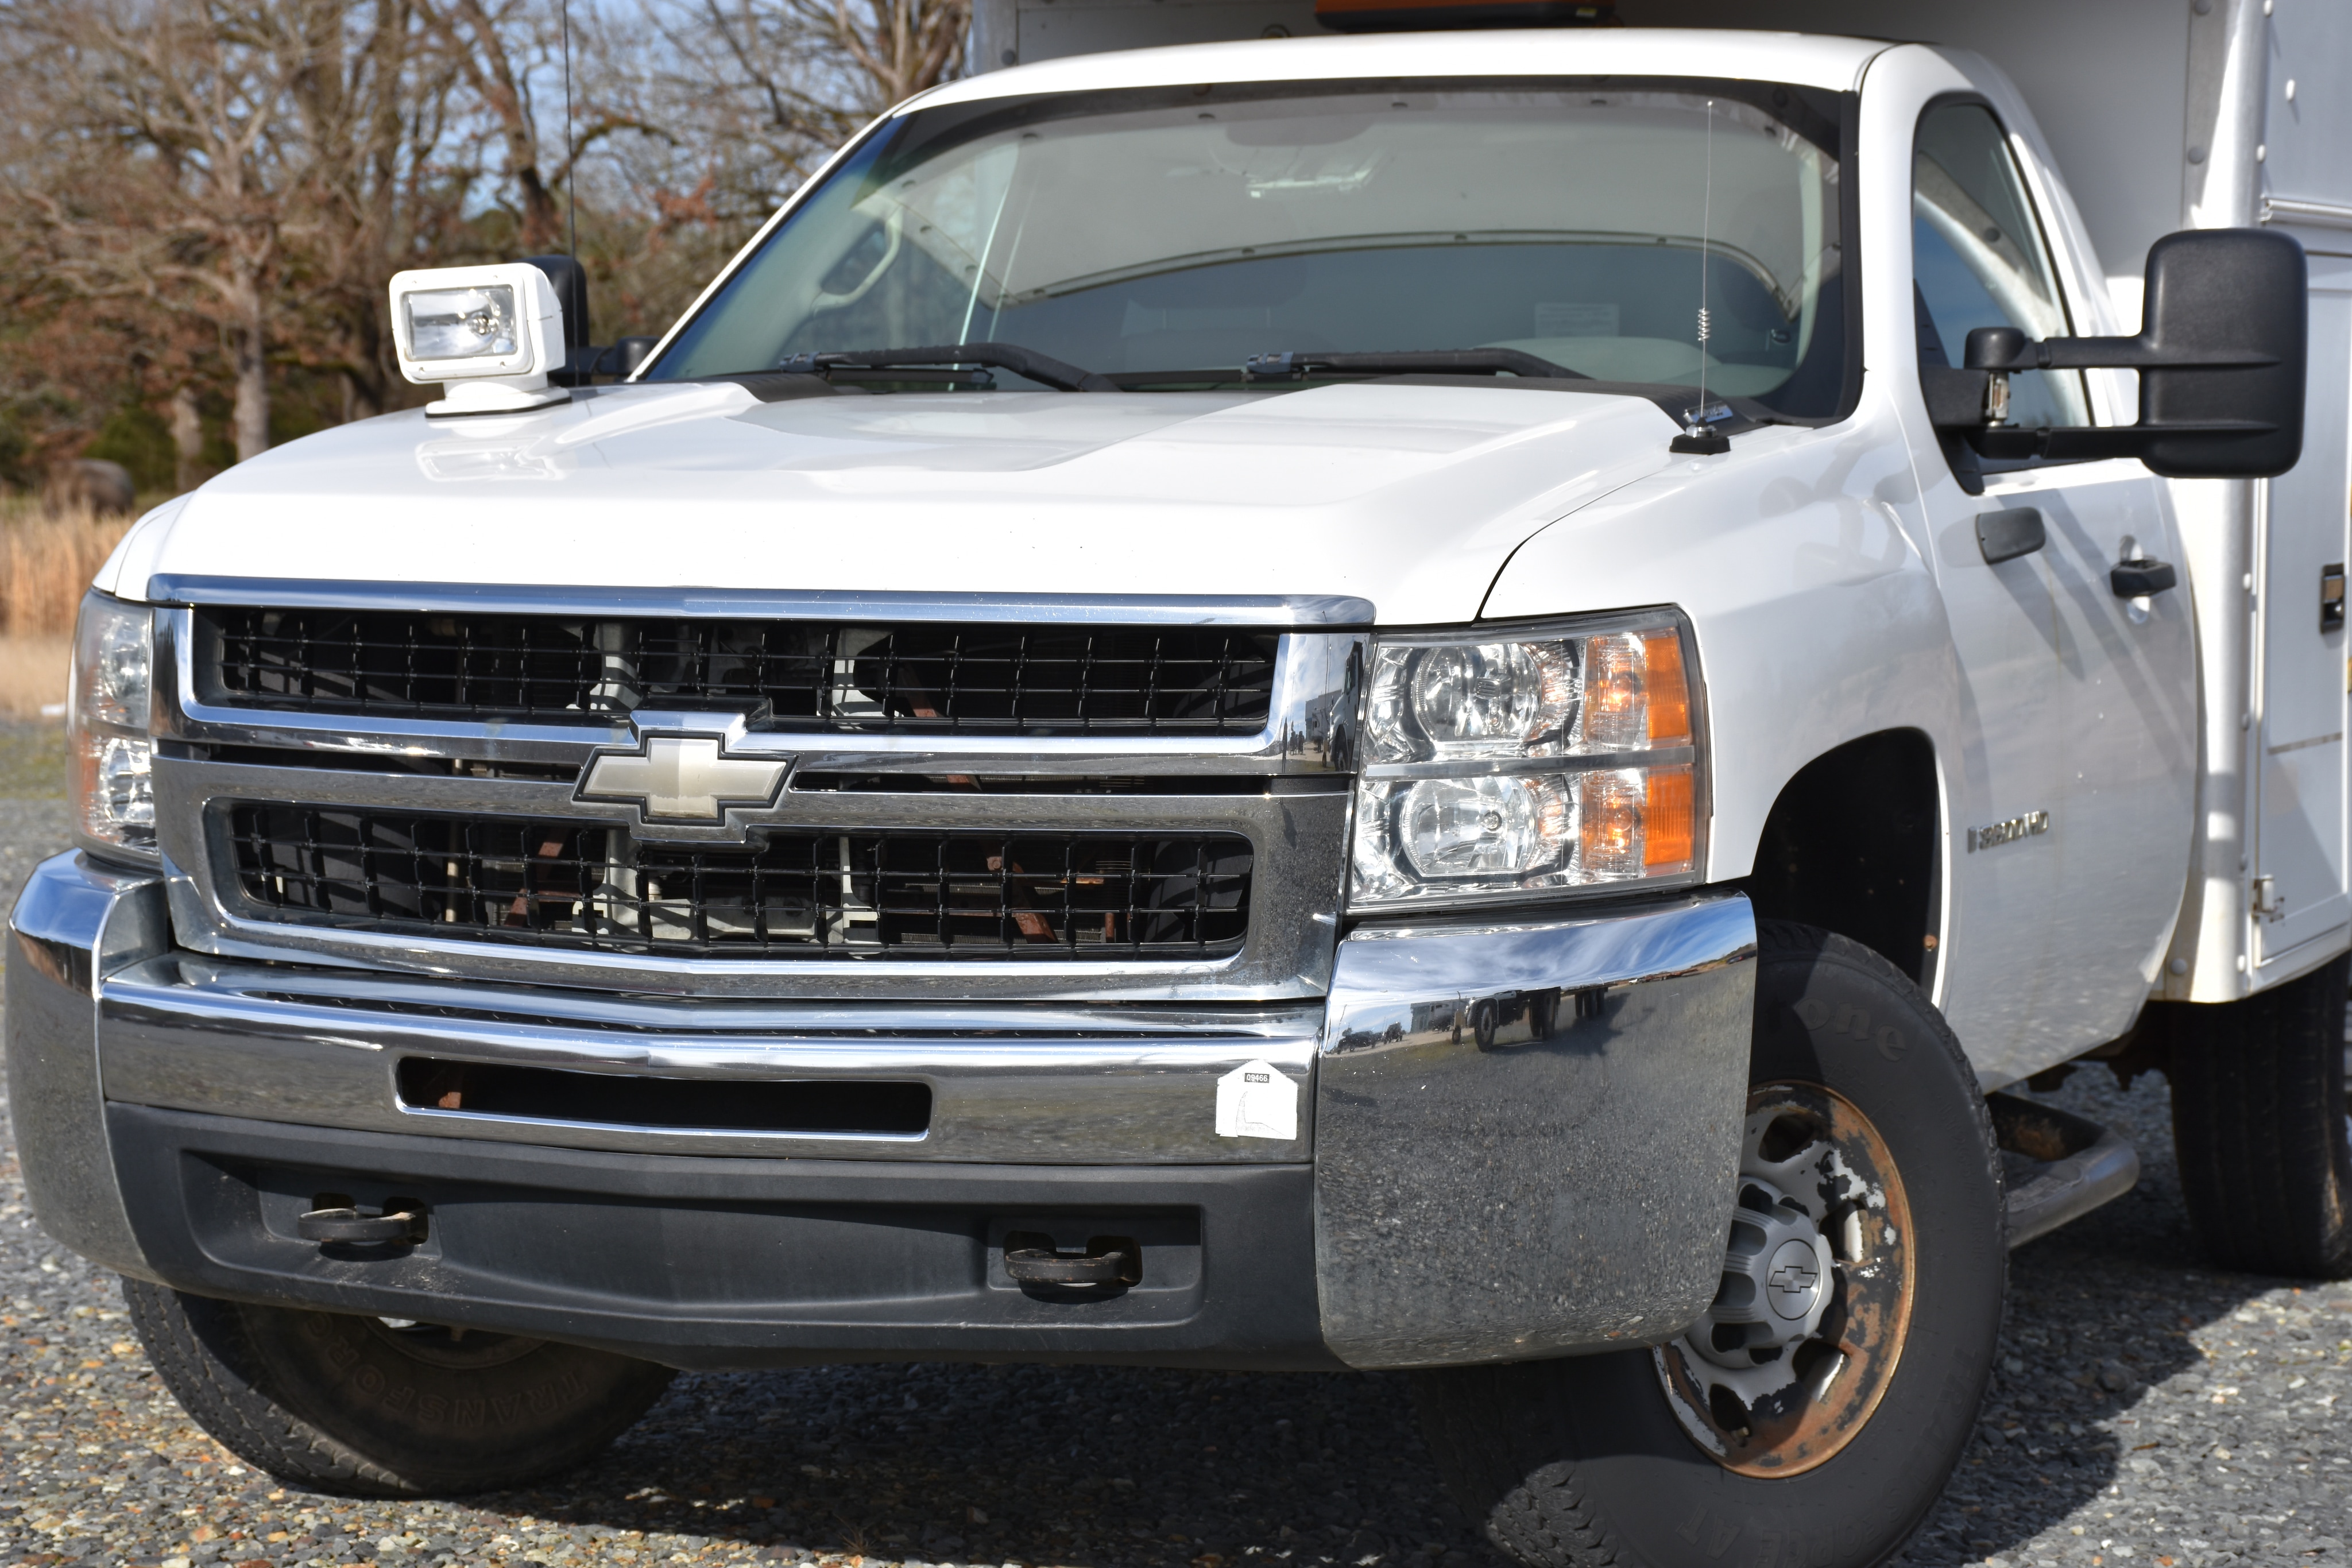 Used 2008 Chevrolet Silverado 3500 Chassis Cab Work Truck with VIN 1GBHC34K58E214864 for sale in De Queen, AR